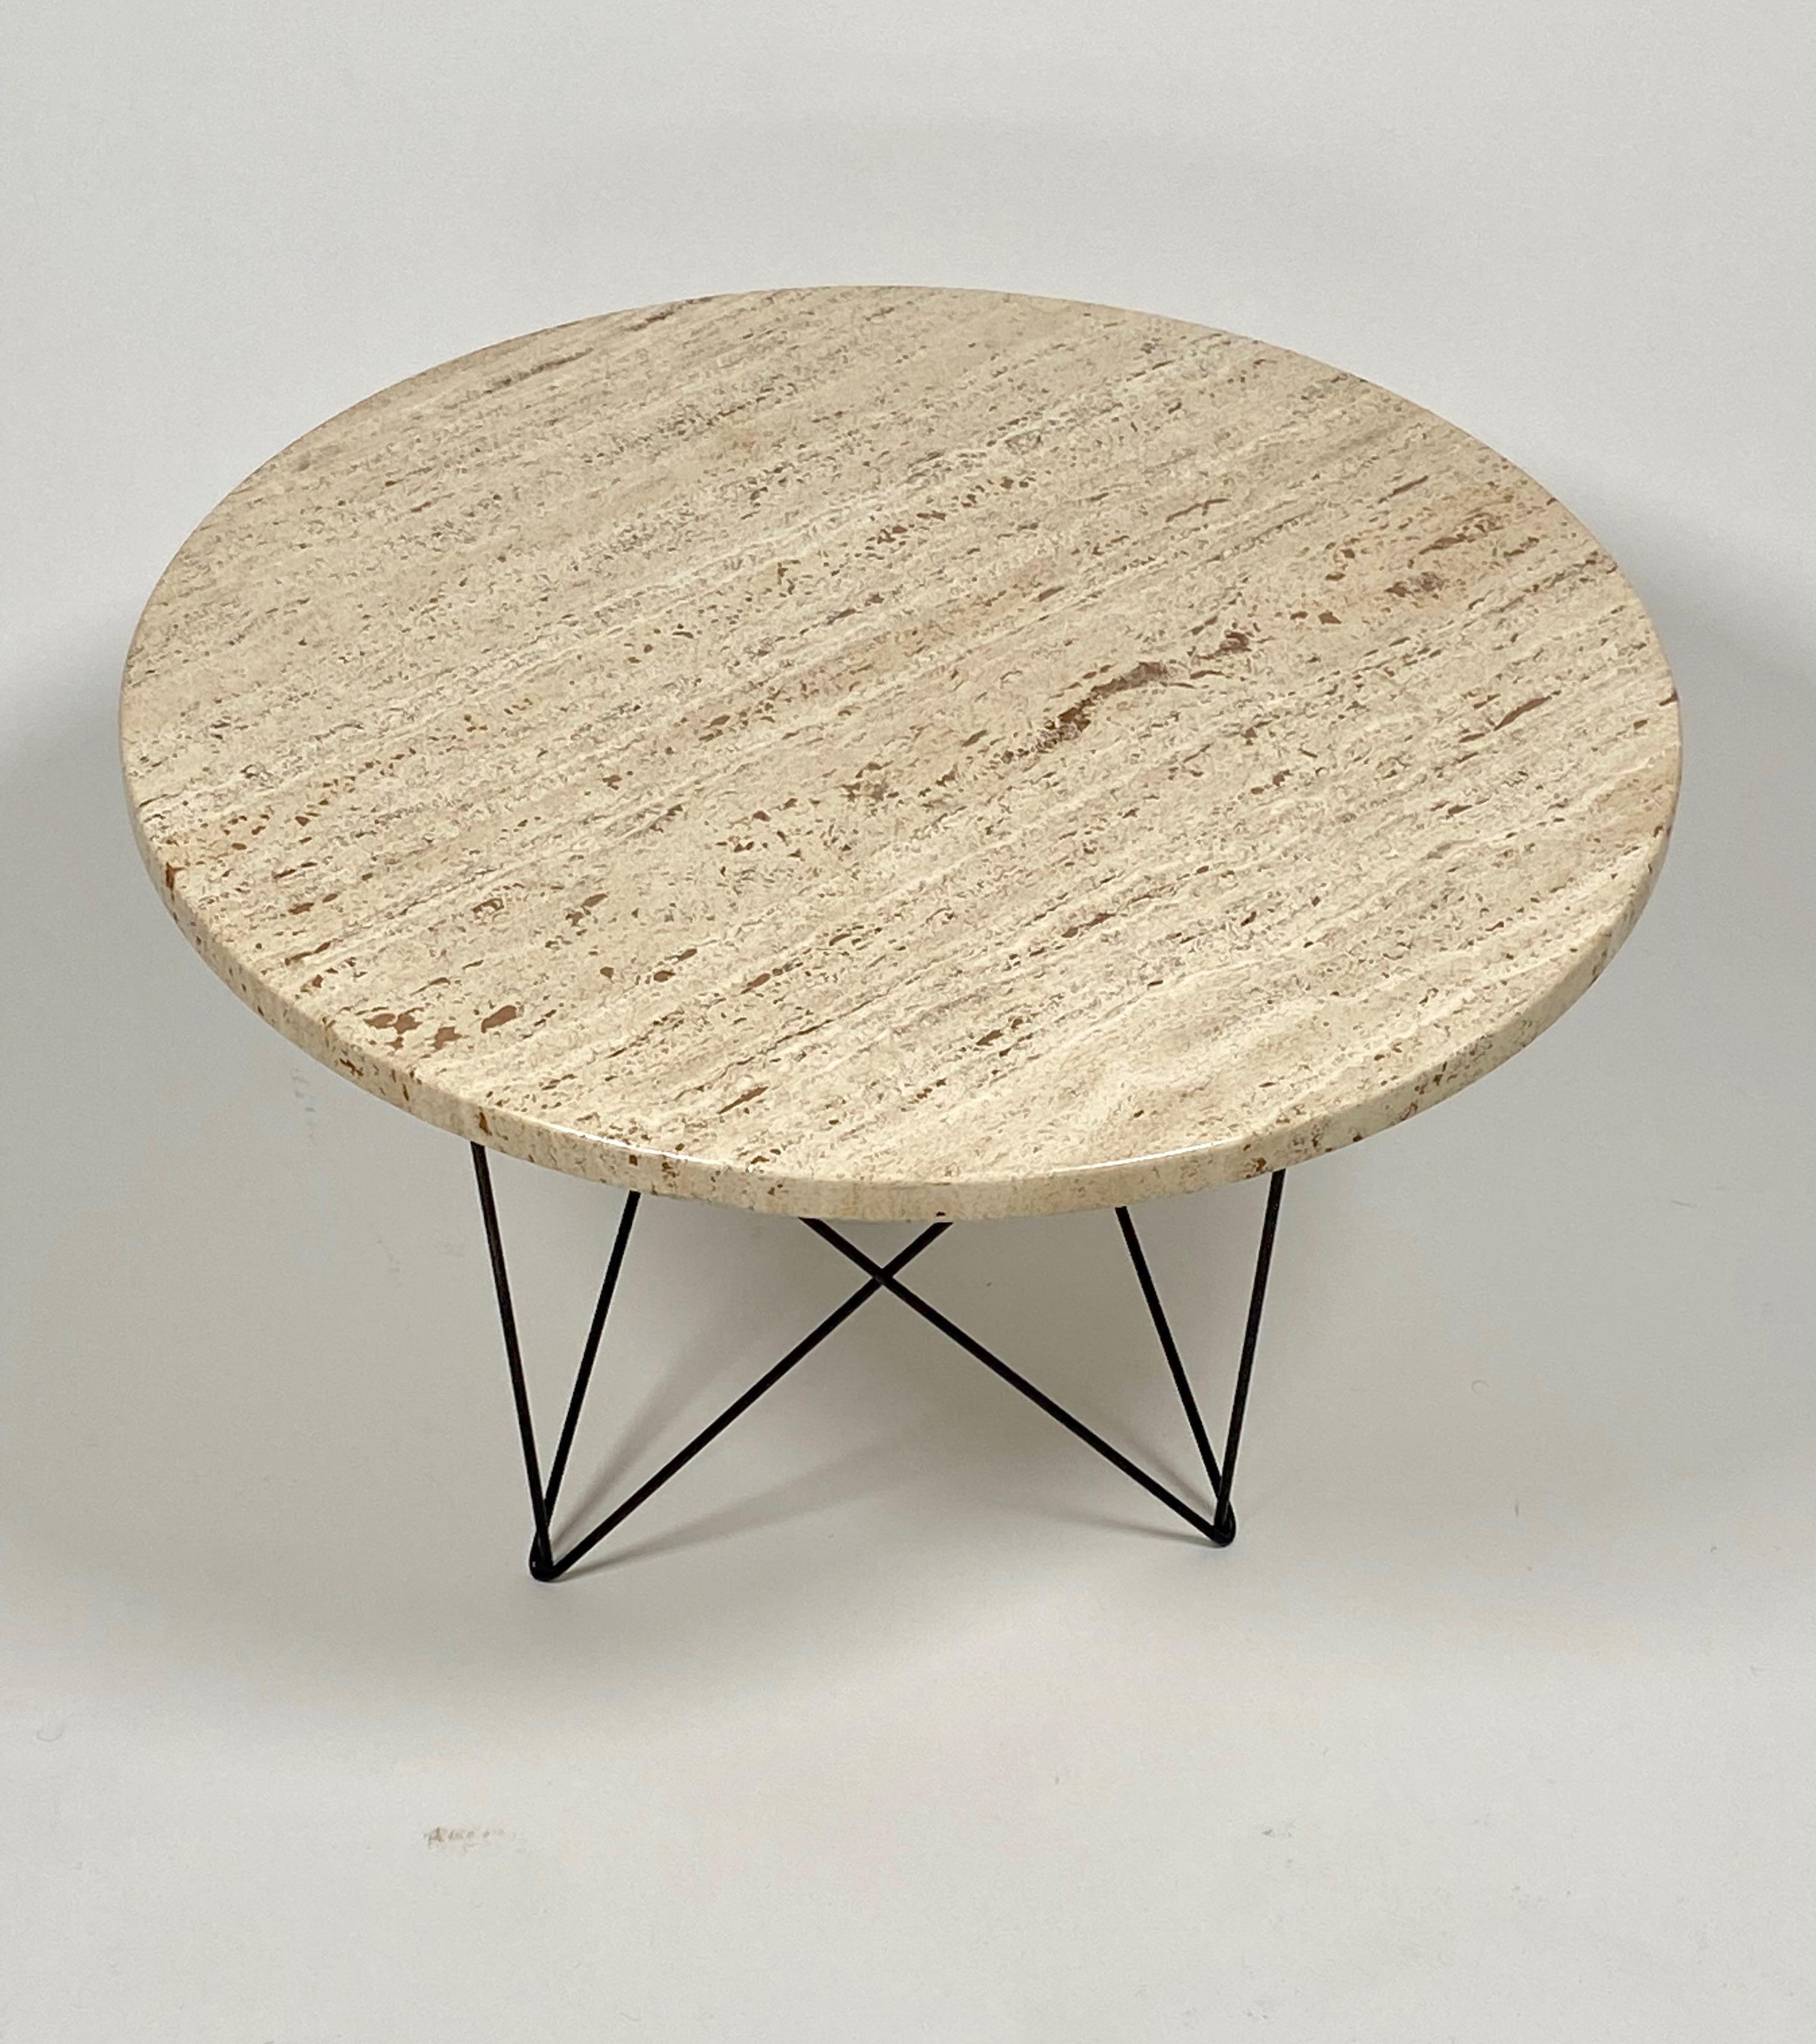 1960s side table in travertine and wire, designed by Martin Perfit for the American company Rene Brancusi. Round travertine top with an architectural wire base in black which creates an floating effect to the table top, a nice design contrast with